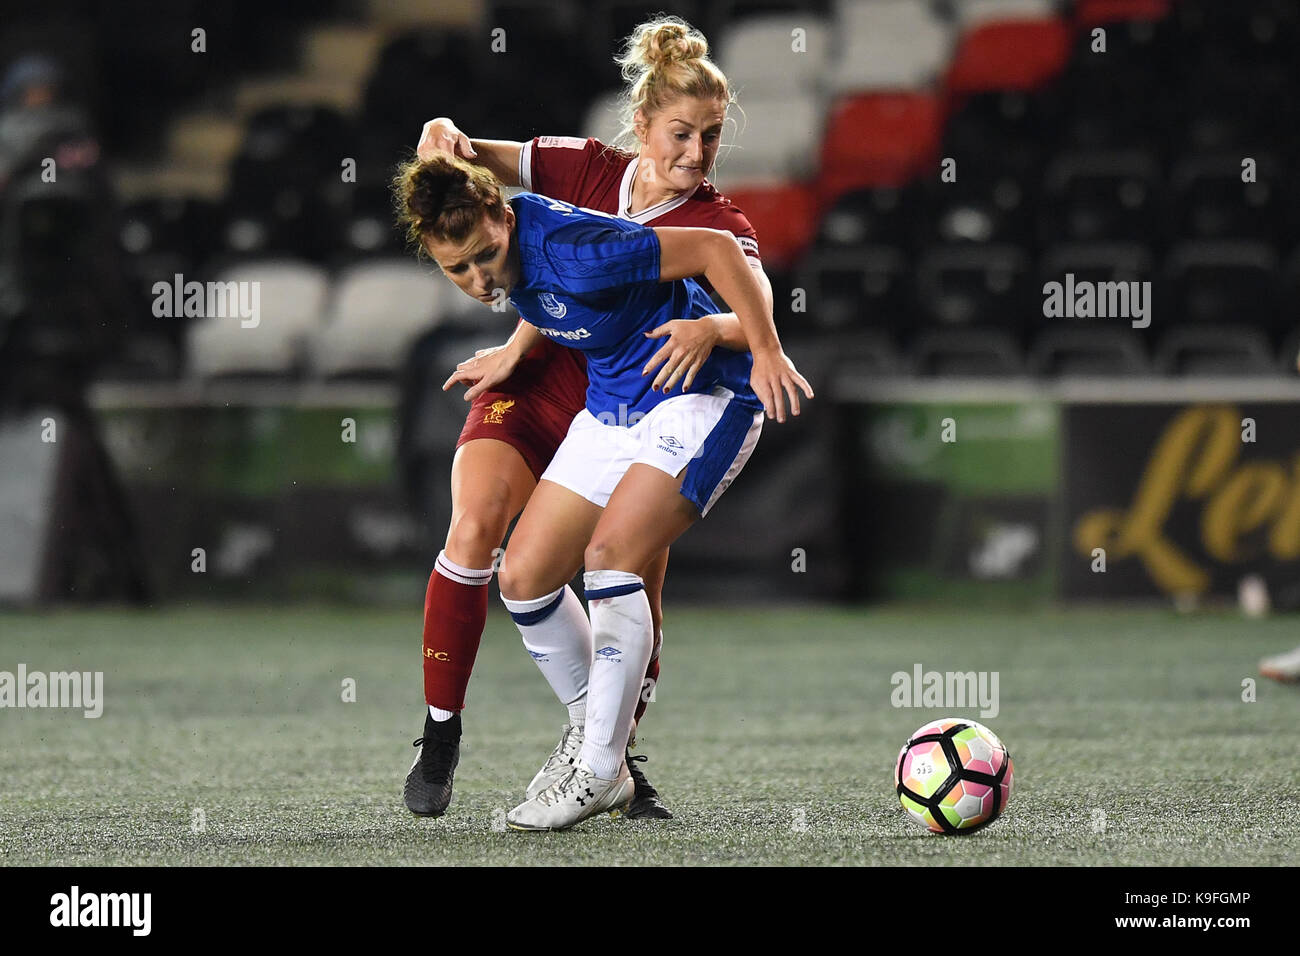 Liverpool's Laura Coombs and Everton's Angharad James compete for possession during the FA Women's Super League match at the Select Security Stadium, Widnes. PRESS ASSOCIATION Photo. Picture date: Friday September 22, 2017. Photo credit should read: Anthony Devlin/PA Wire. RESTRICTIONS: No use with unauthorised audio, video, data, fixture lists, club/league logos or 'live' services. Online in-match use limited to 75 images, no video emulation. No use in betting, games or single club/league/player publications. Stock Photo